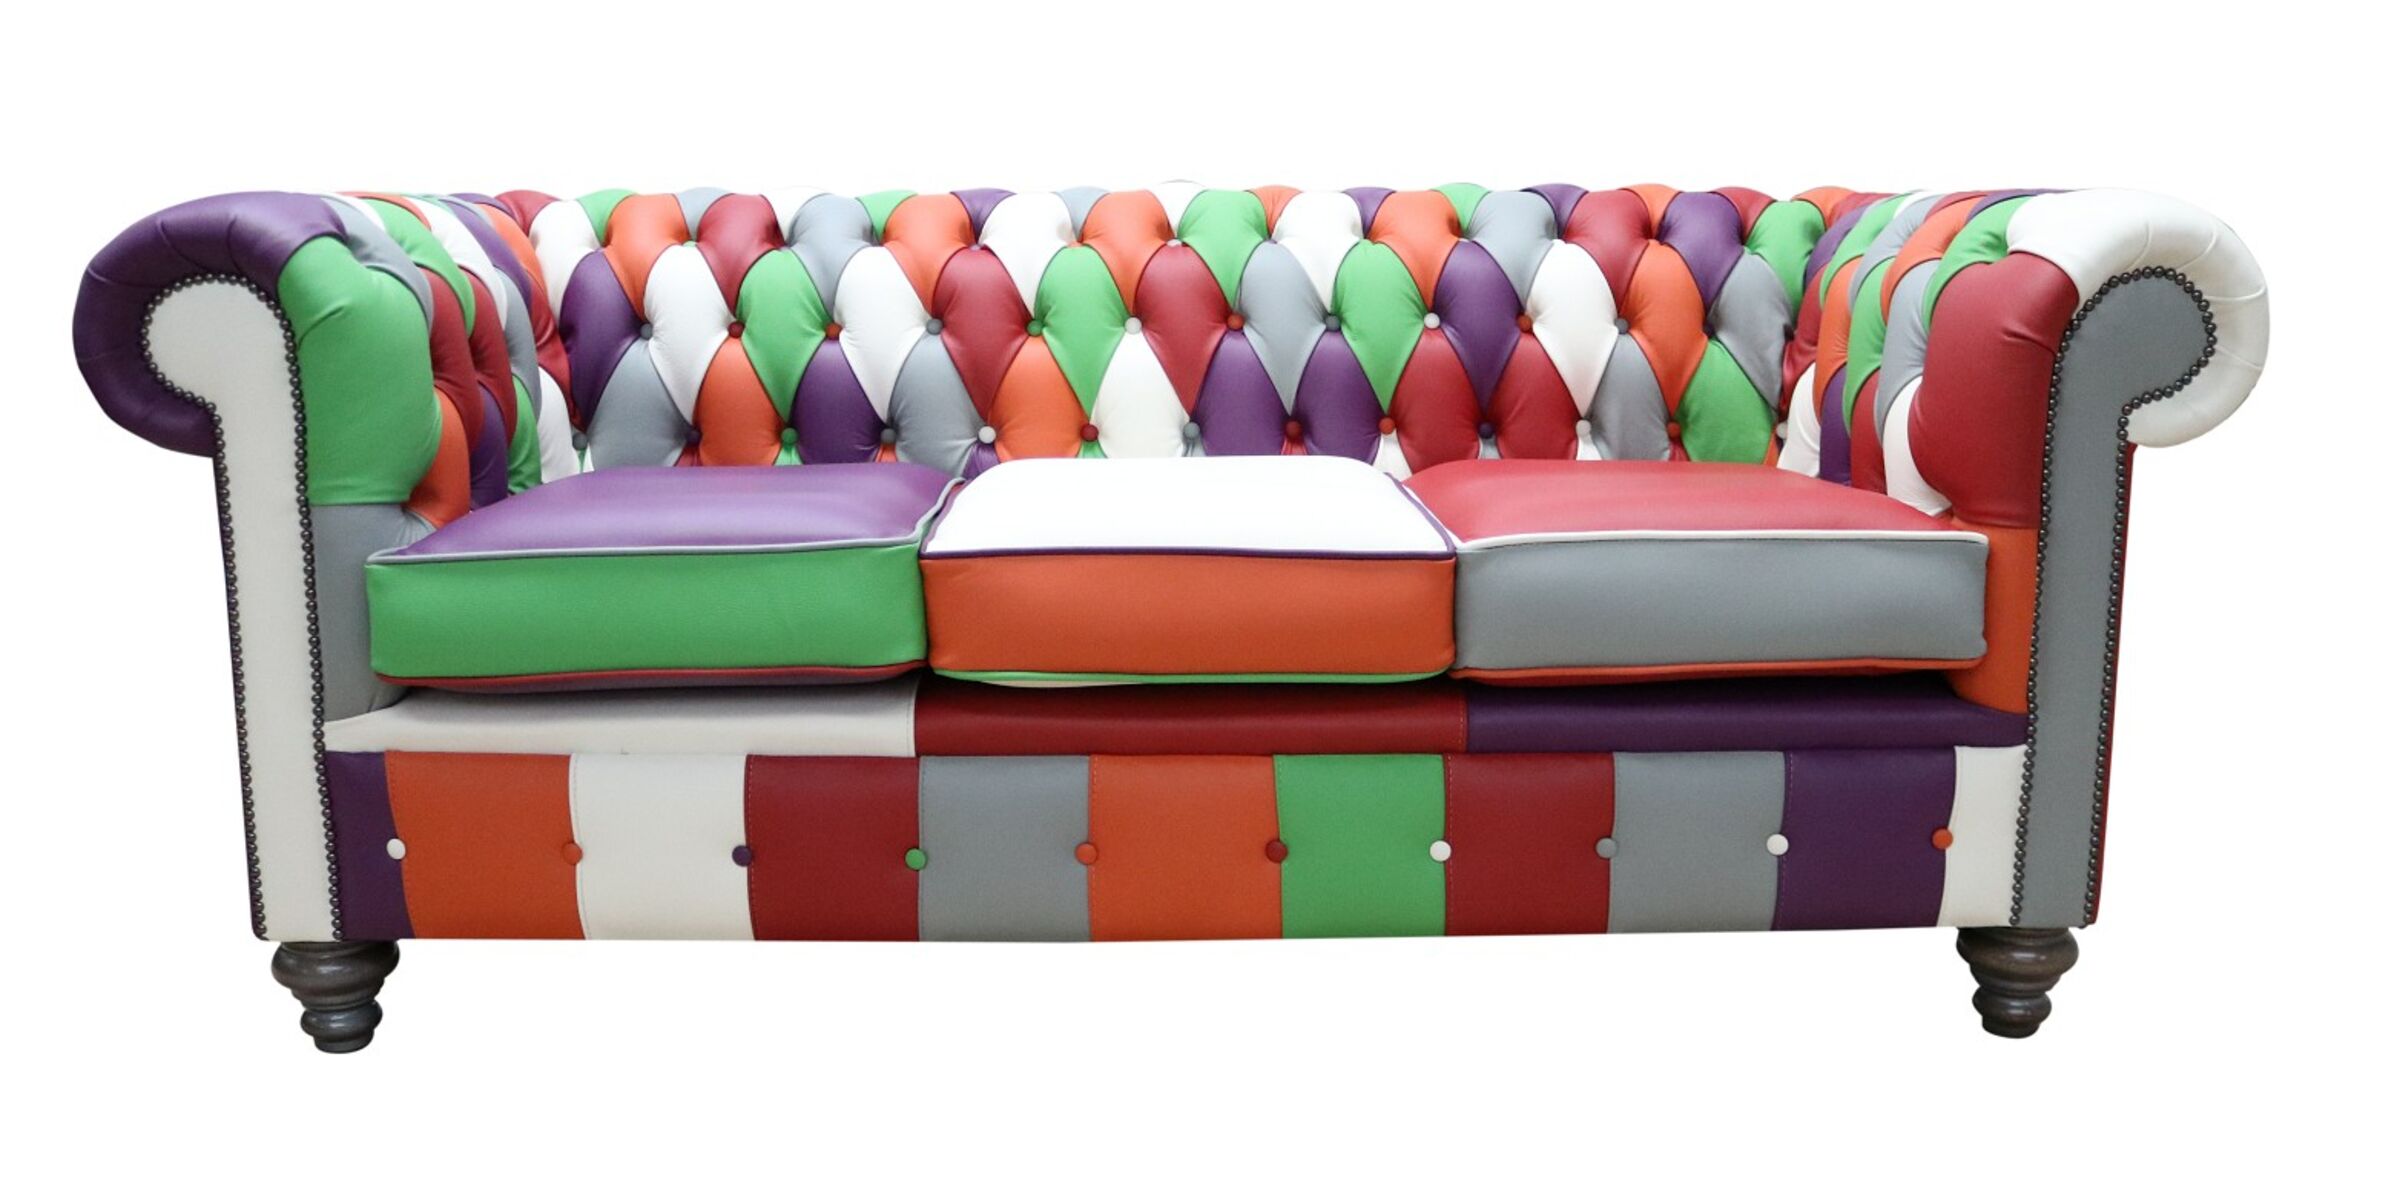 Chesterfield Patchwork Leather Sofa, Patchwork Leather Chesterfield Sofa